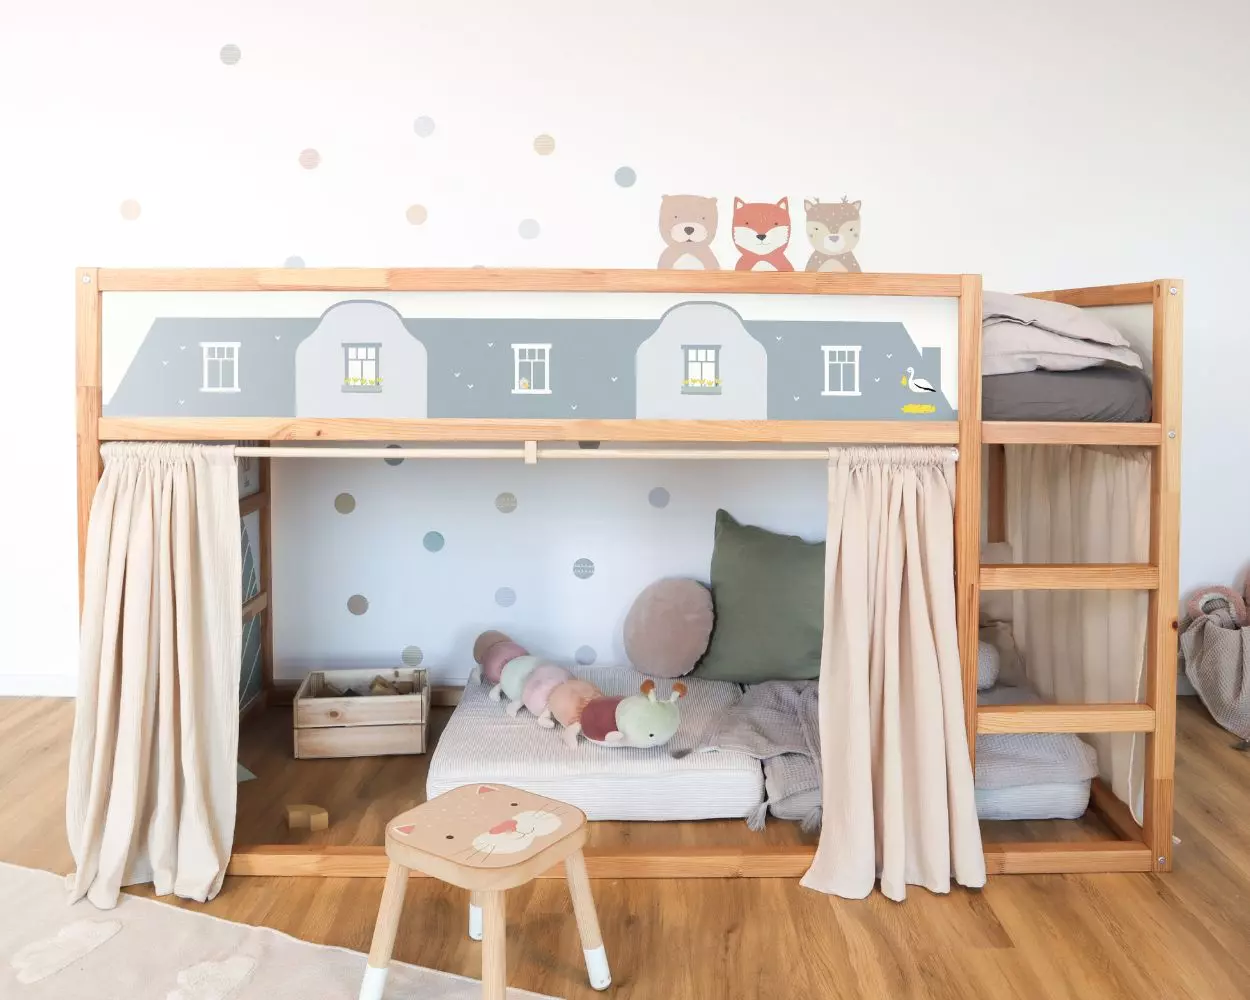 Furnishing a small children's room